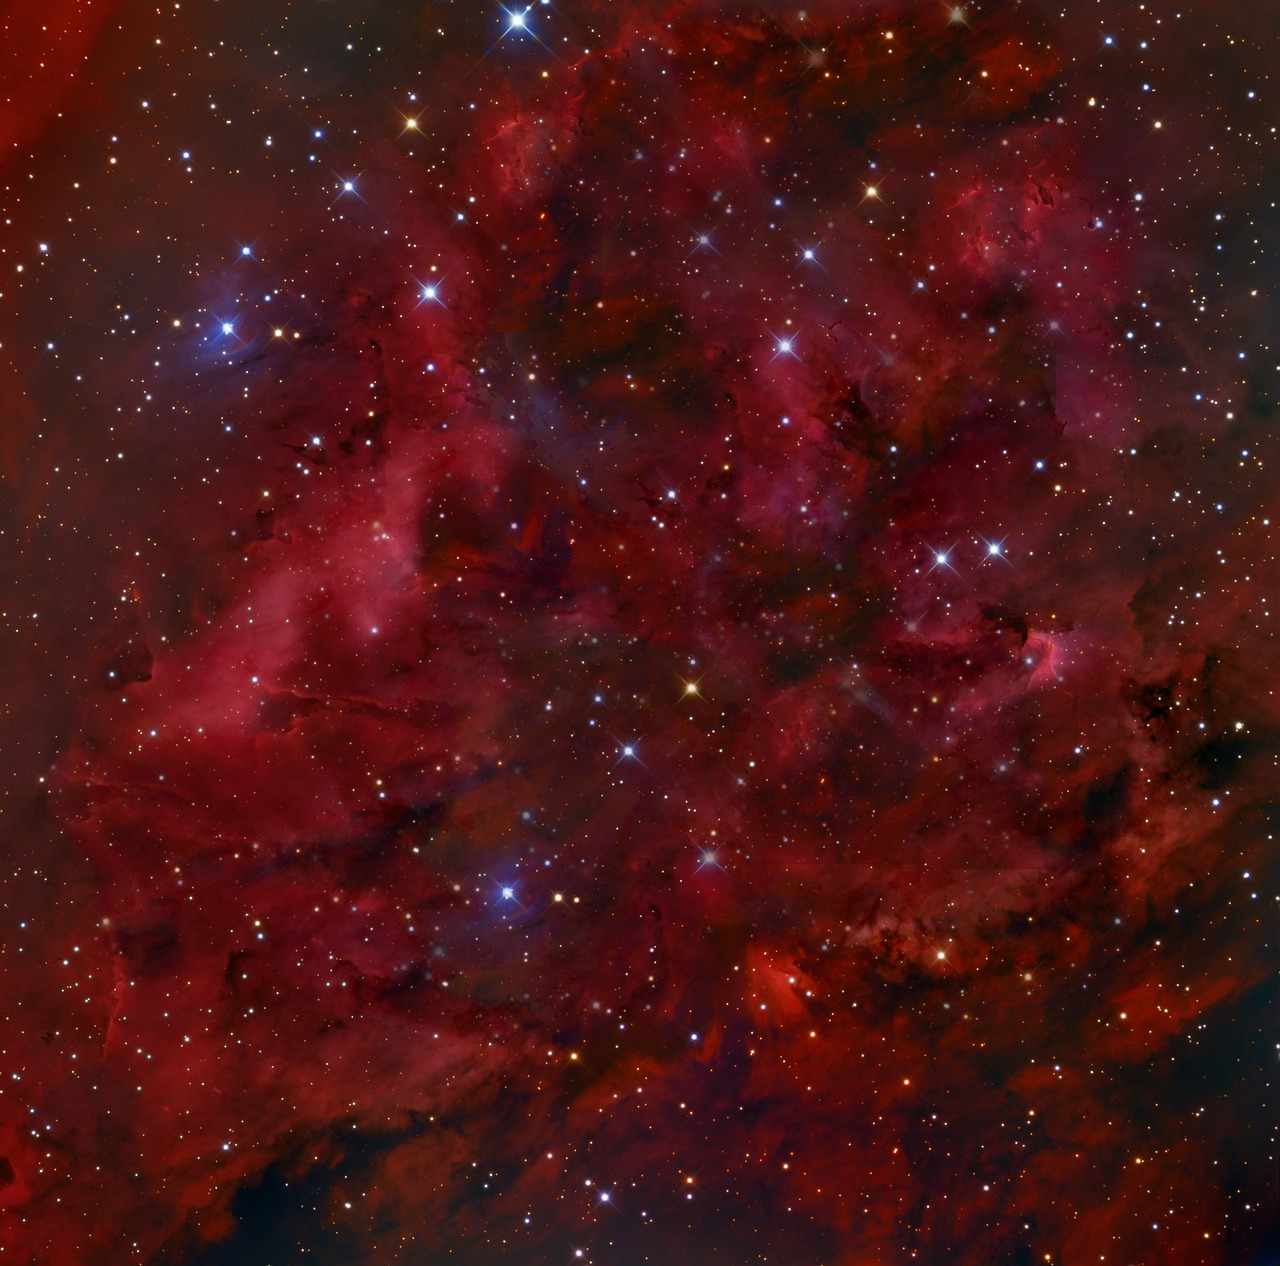 a star filled sky filled with lots of stars, a portrait, by William Powhida, space art, red cumulonimbus clouds, heavy pigment, 16k upscaled image, taken through a telescope